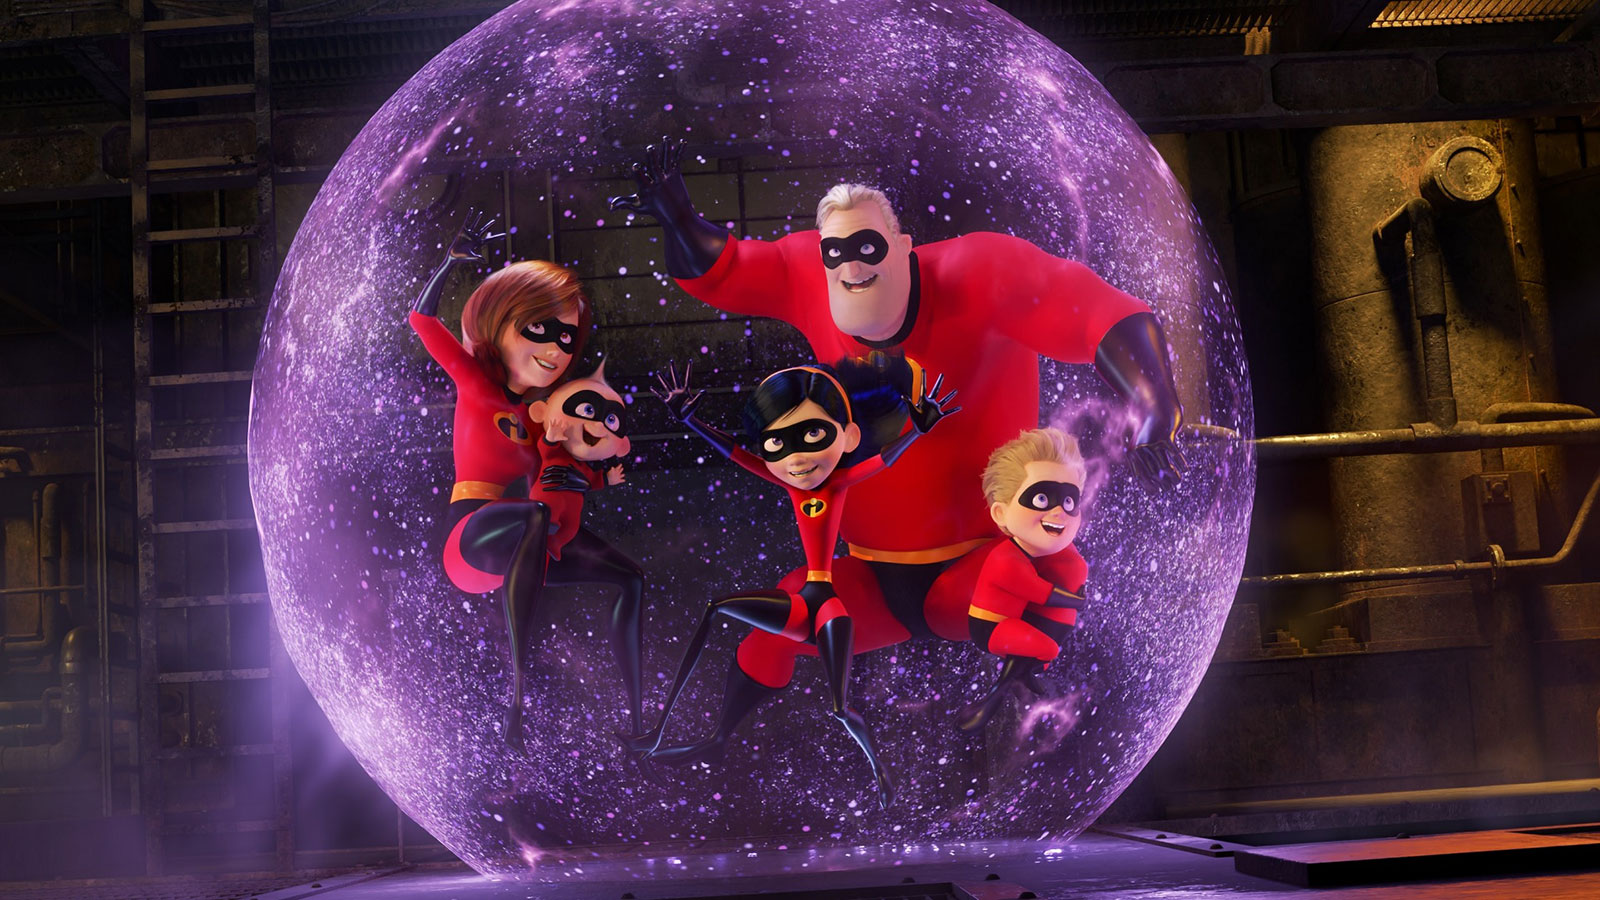 I Bet You Can’t Identify More Than 10/15 of These Pixar Movie Foods The Incredibles 2